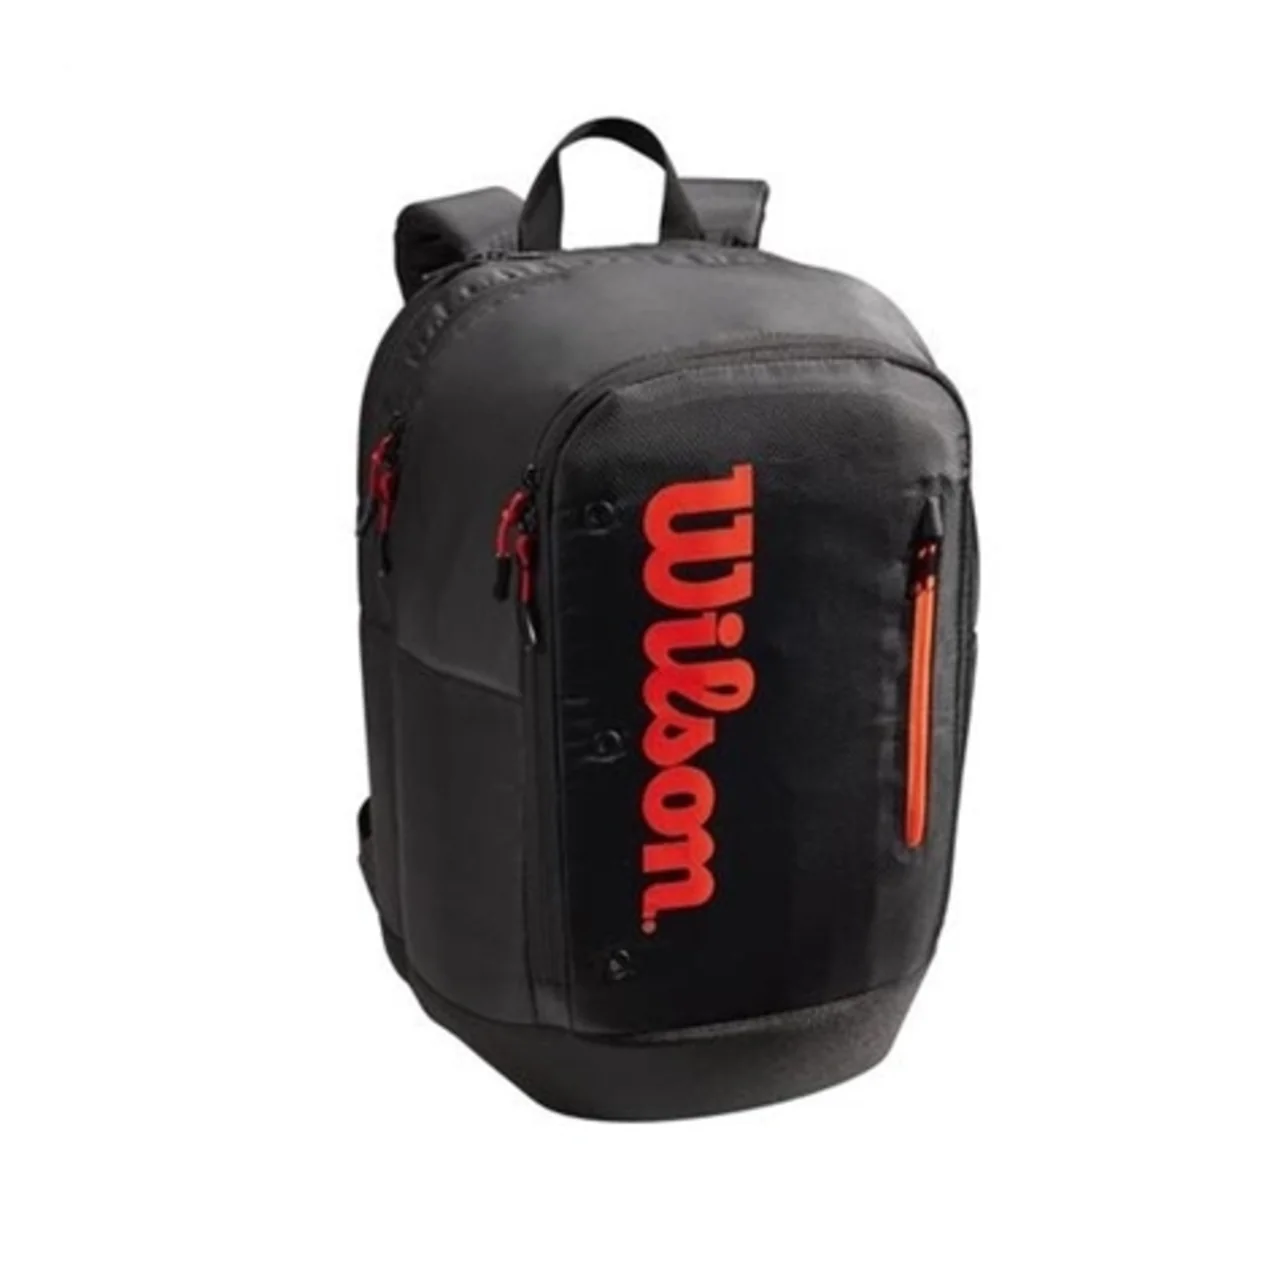 Wilson Tour Backpack Black/Red